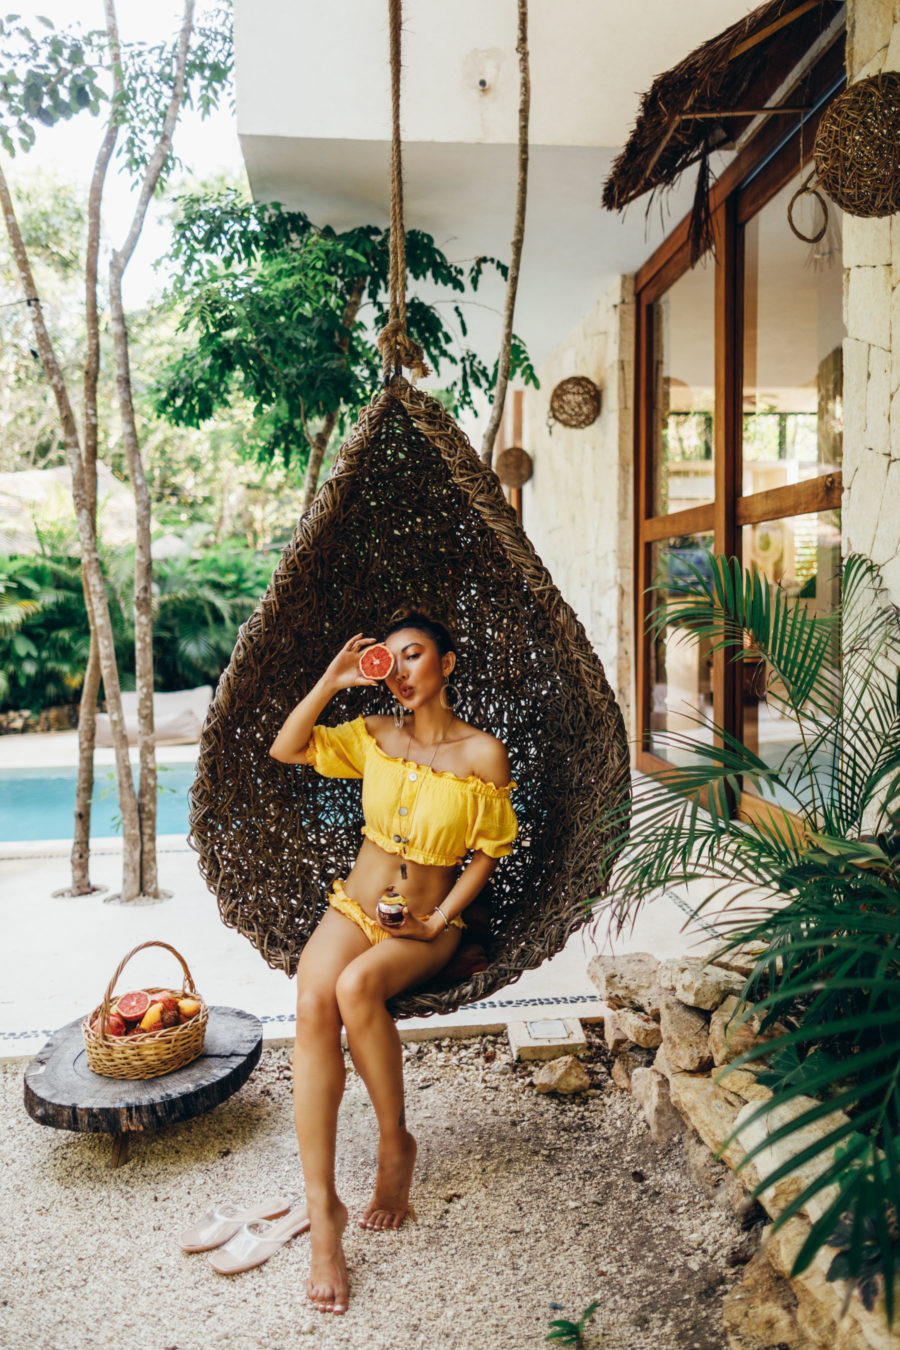 fashion blogger jessica wang wears yellow bikini and grapefruit while sharing foods that boost your immune system // Jessica Wang - Notjessfashion.com